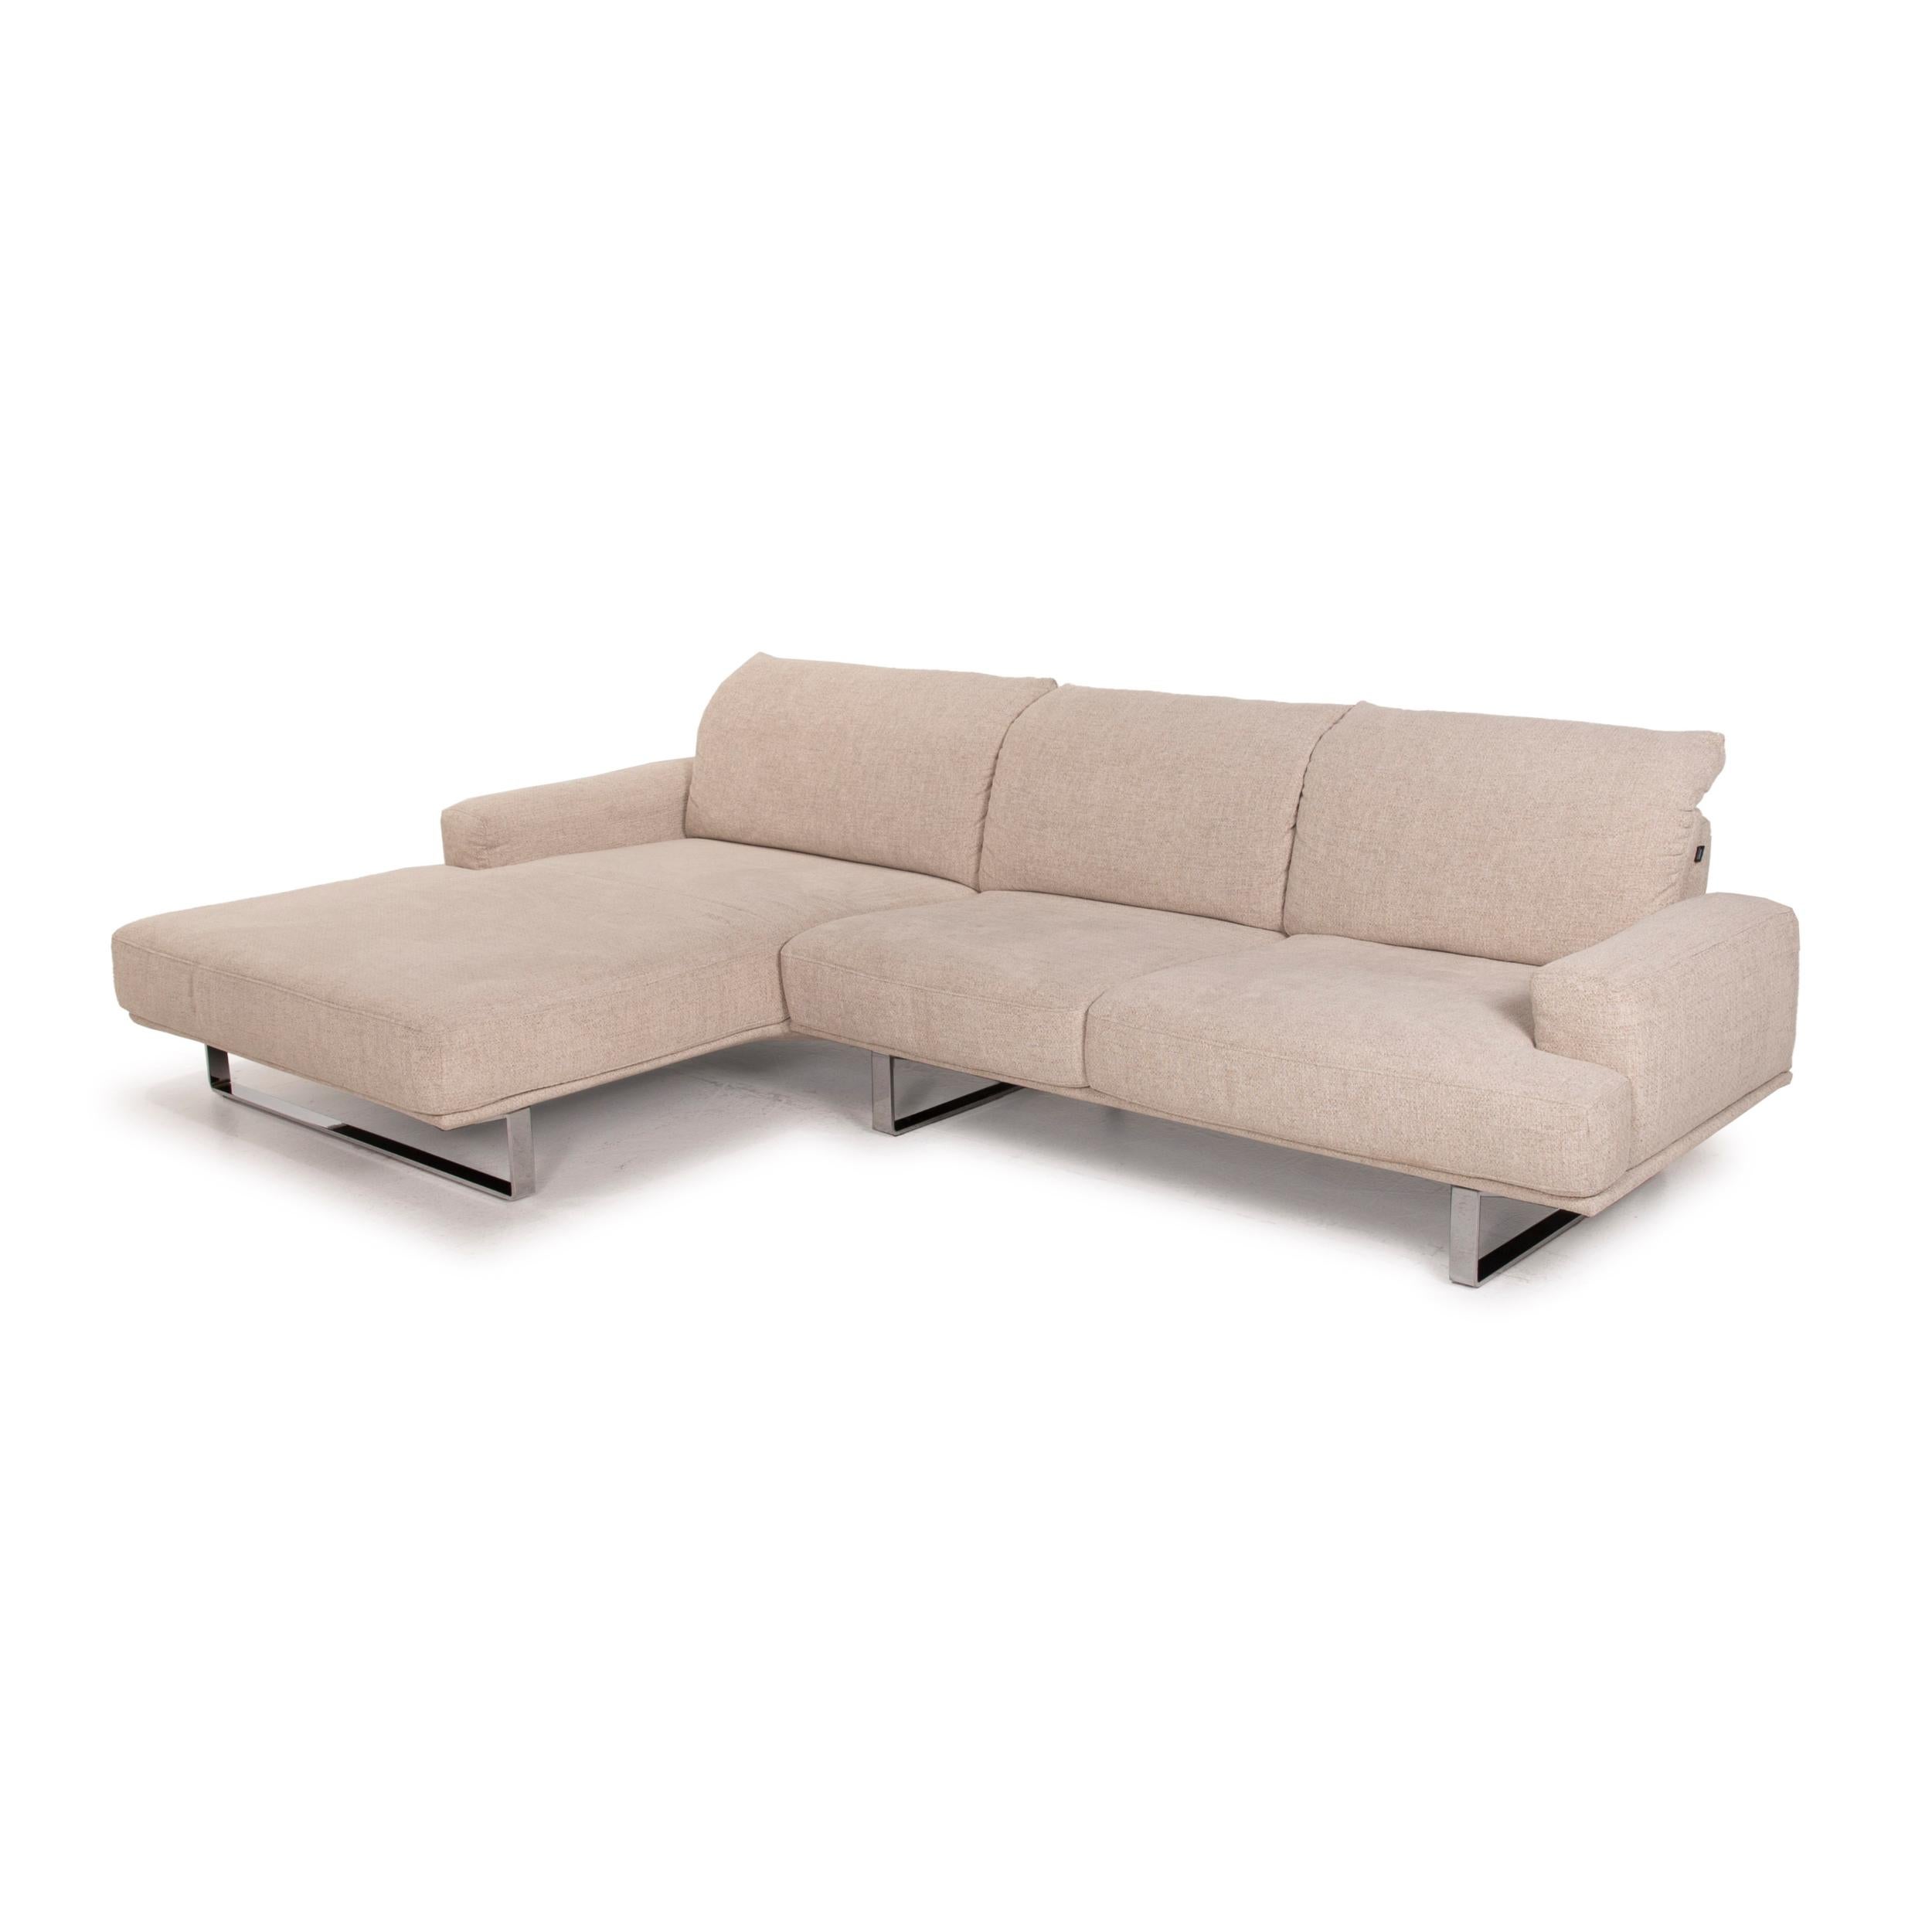 Dieter Knoll Collection Lesina Fabric Sofa Cream Corner Sofa Electrical Function 1